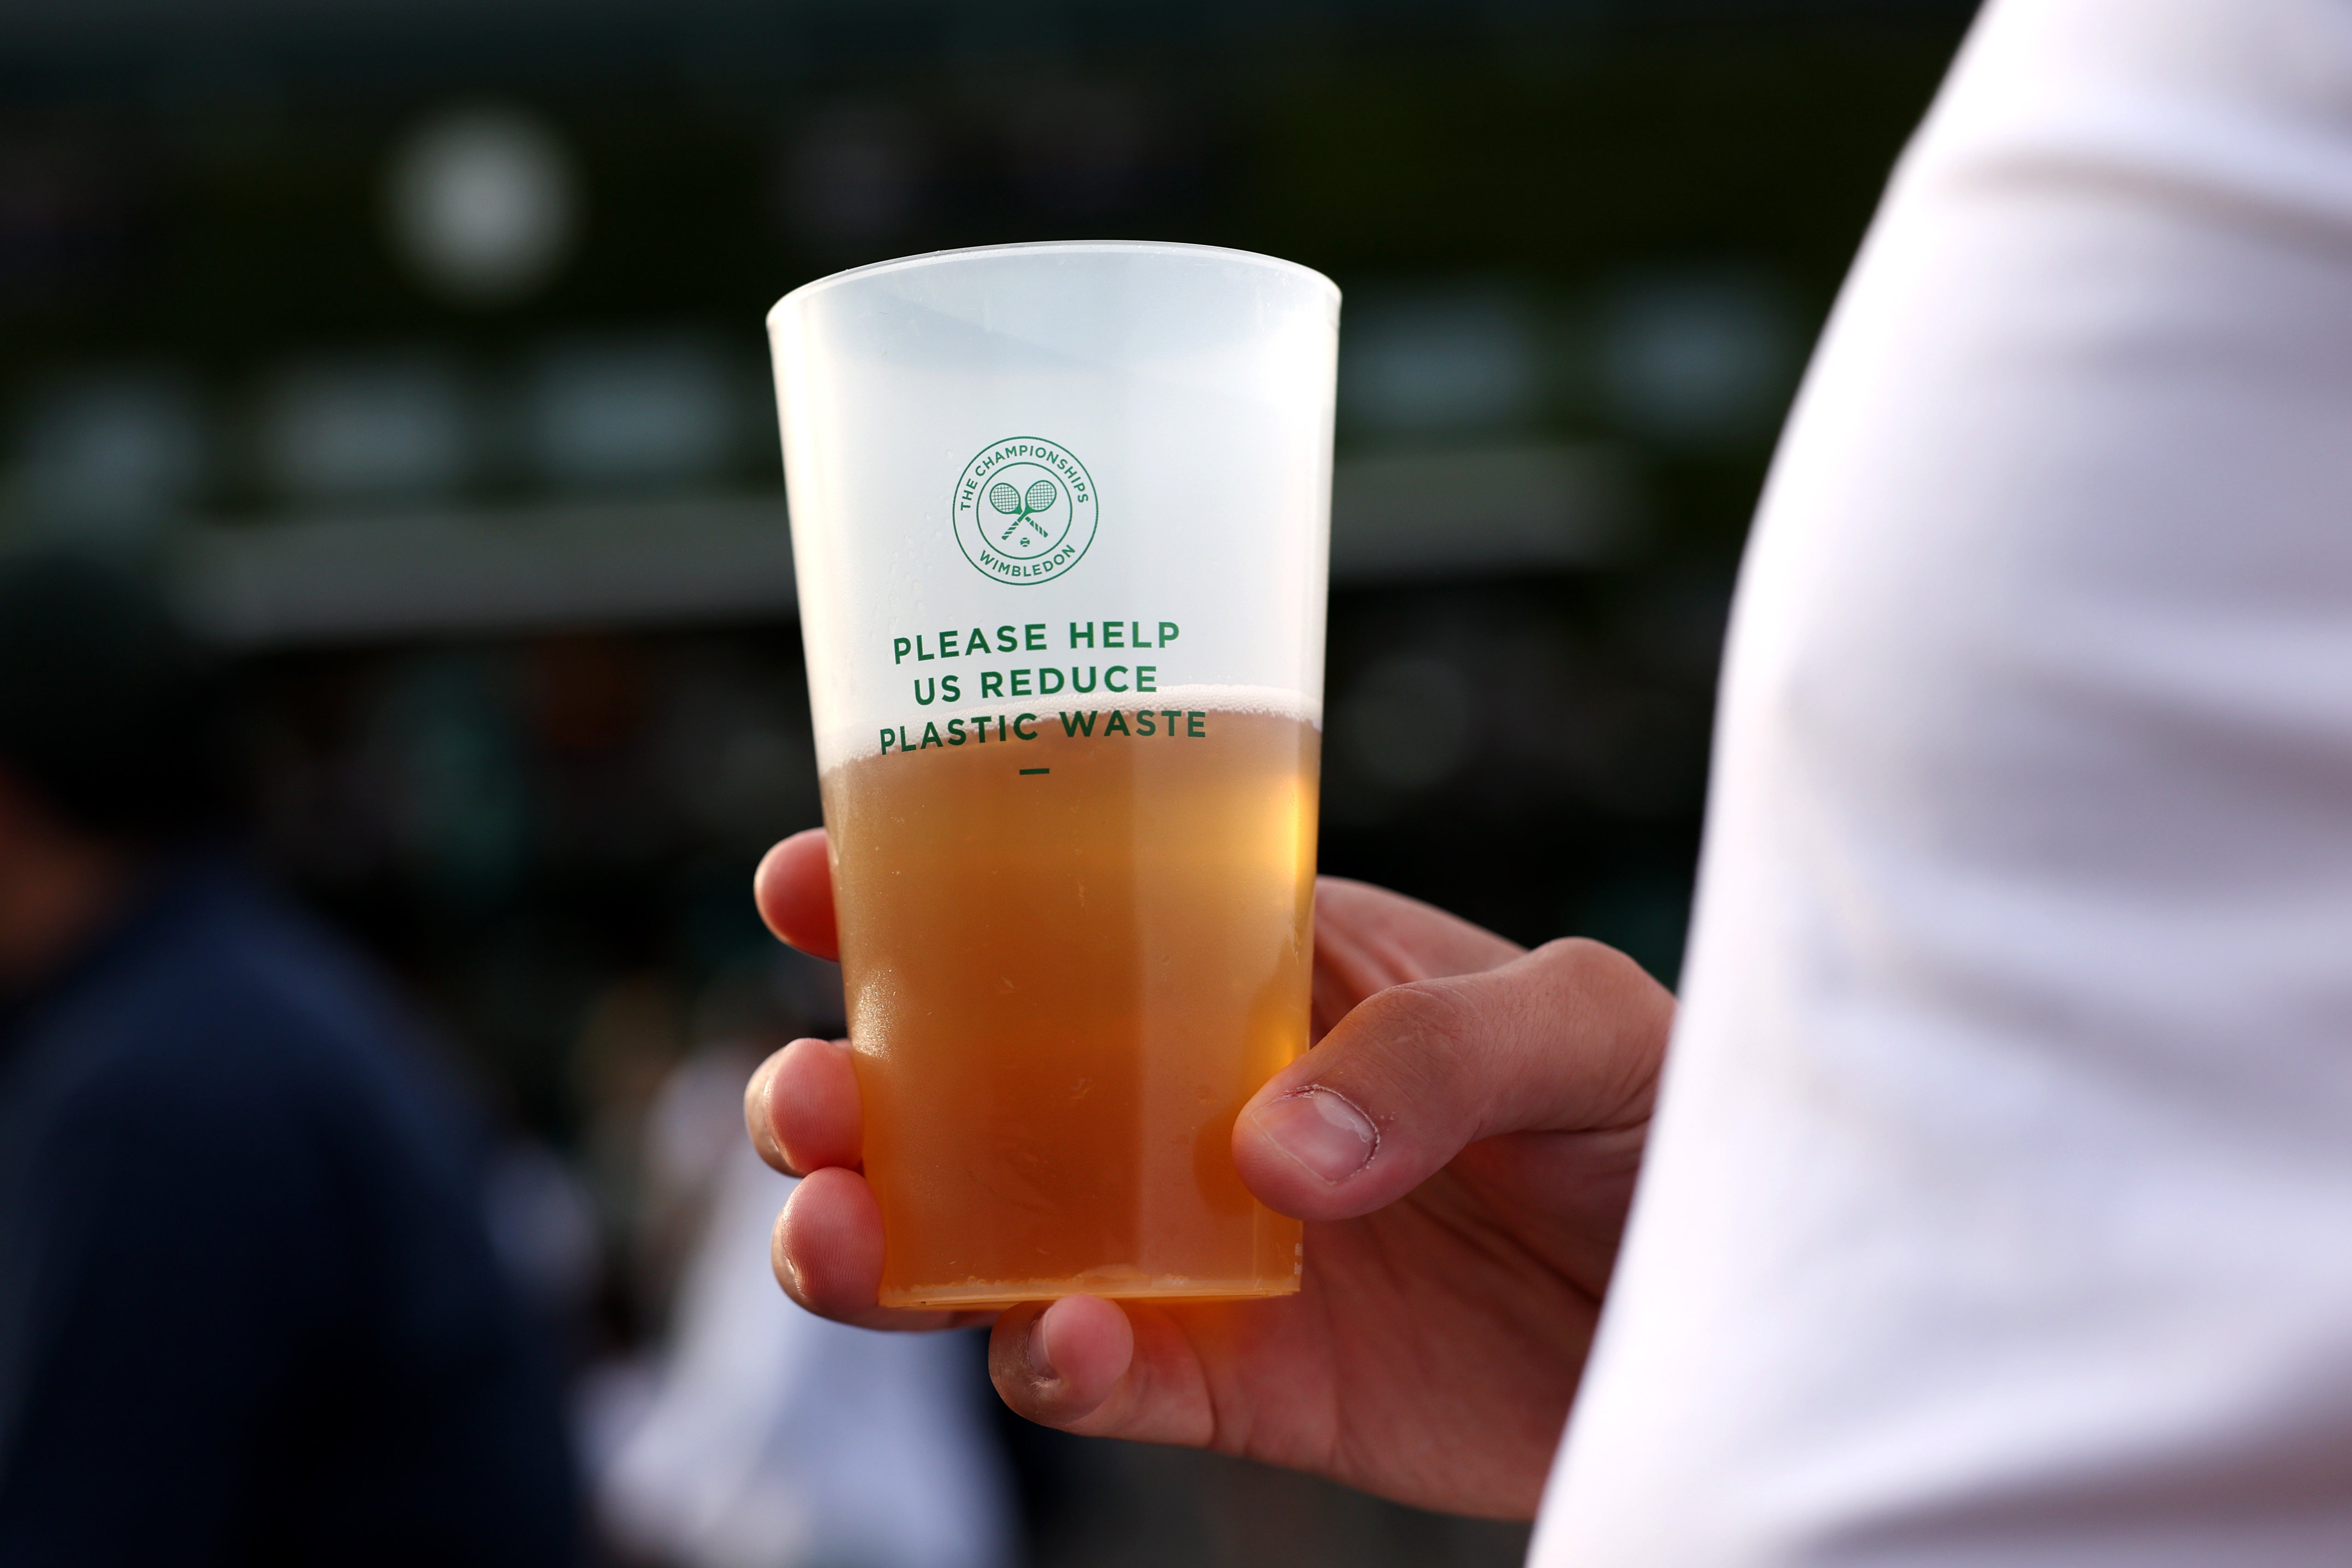 Wimbledon organisers have confirmed that there is no plan for a booze ban